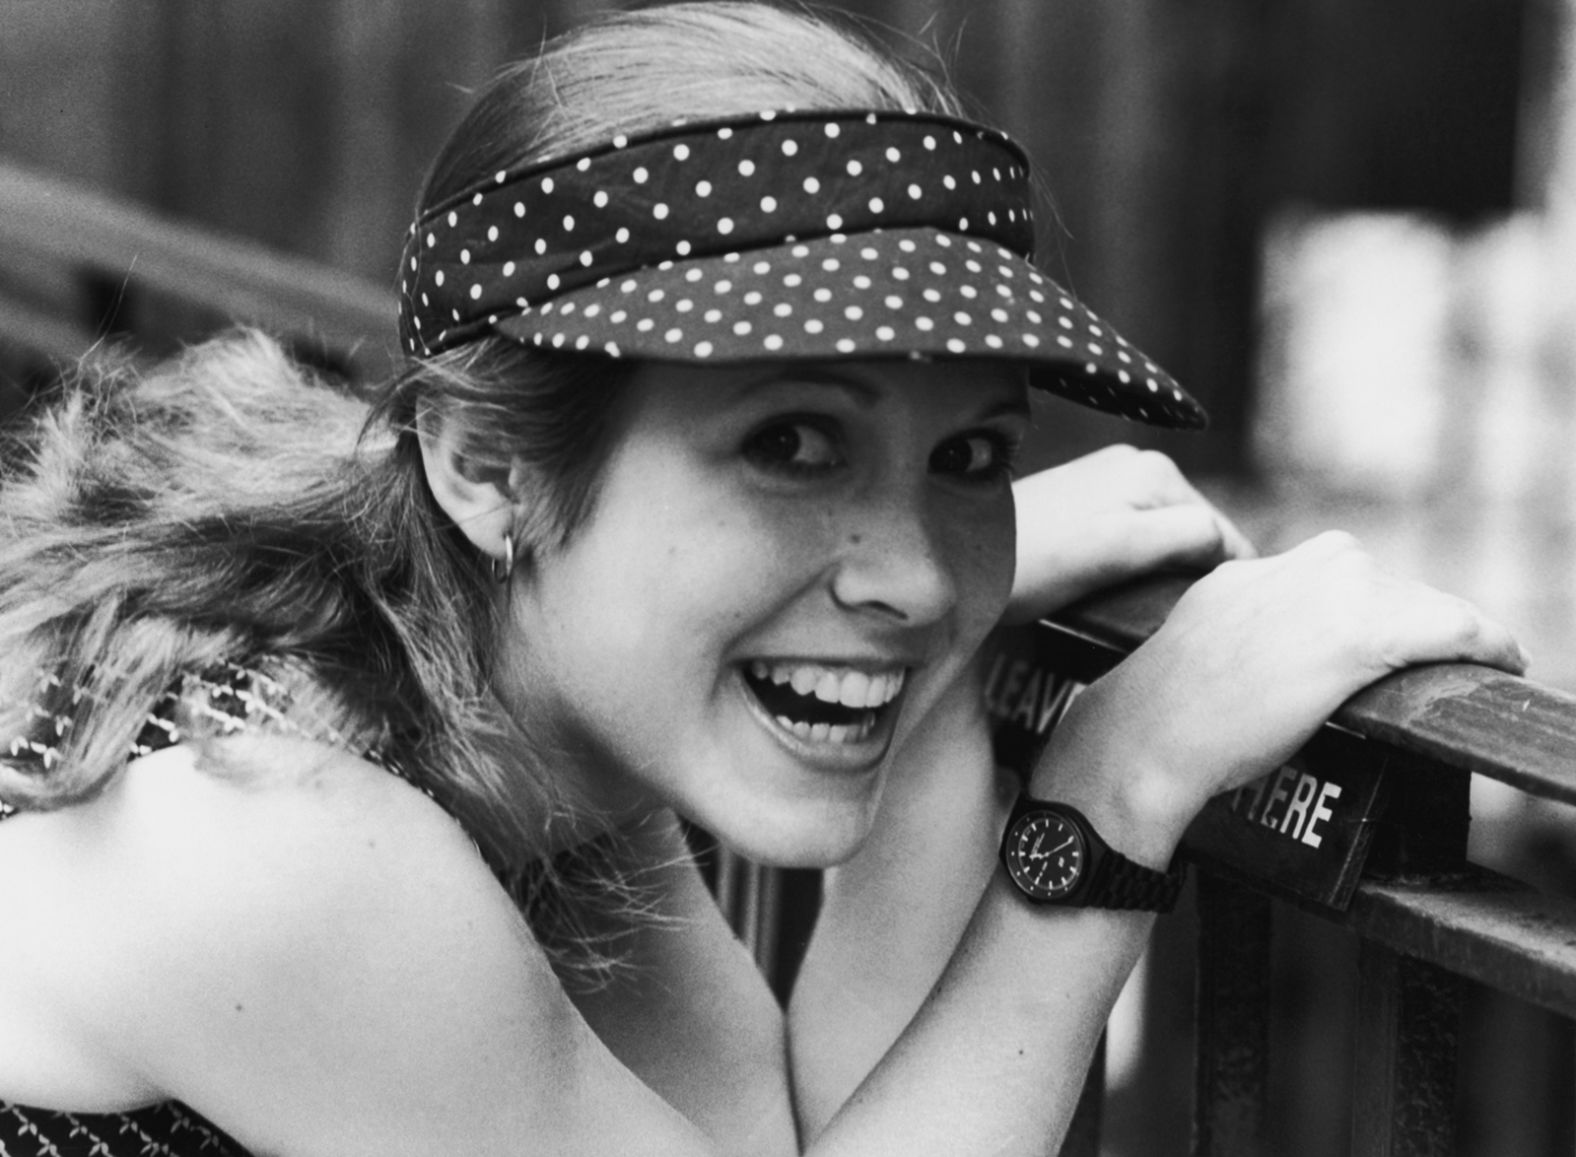 Fisher, seen here in 1980, appeared in many films, television shows and plays during her career. She also became a <a href="index.php?page=&url=http%3A%2F%2Fwww.cnn.com%2F2007%2FSHOWBIZ%2FMovies%2F03%2F07%2Fcarrie.fisher%2Findex.html" target="_blank">well-respected script doctor</a> for movies such as "The Wedding Singer" and "Sister Act."